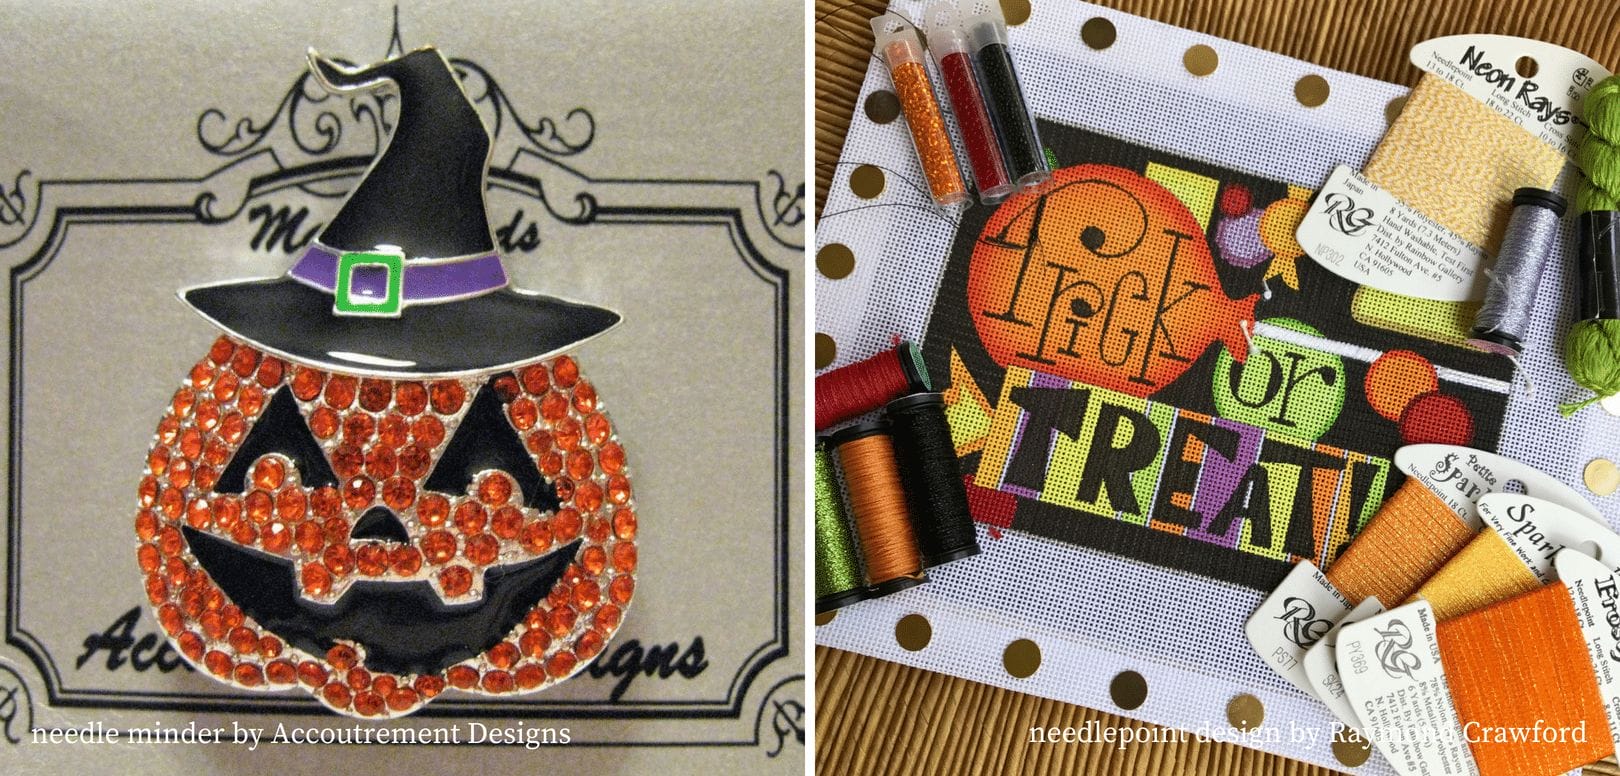 Match a needle minder to your next needlepoint project!